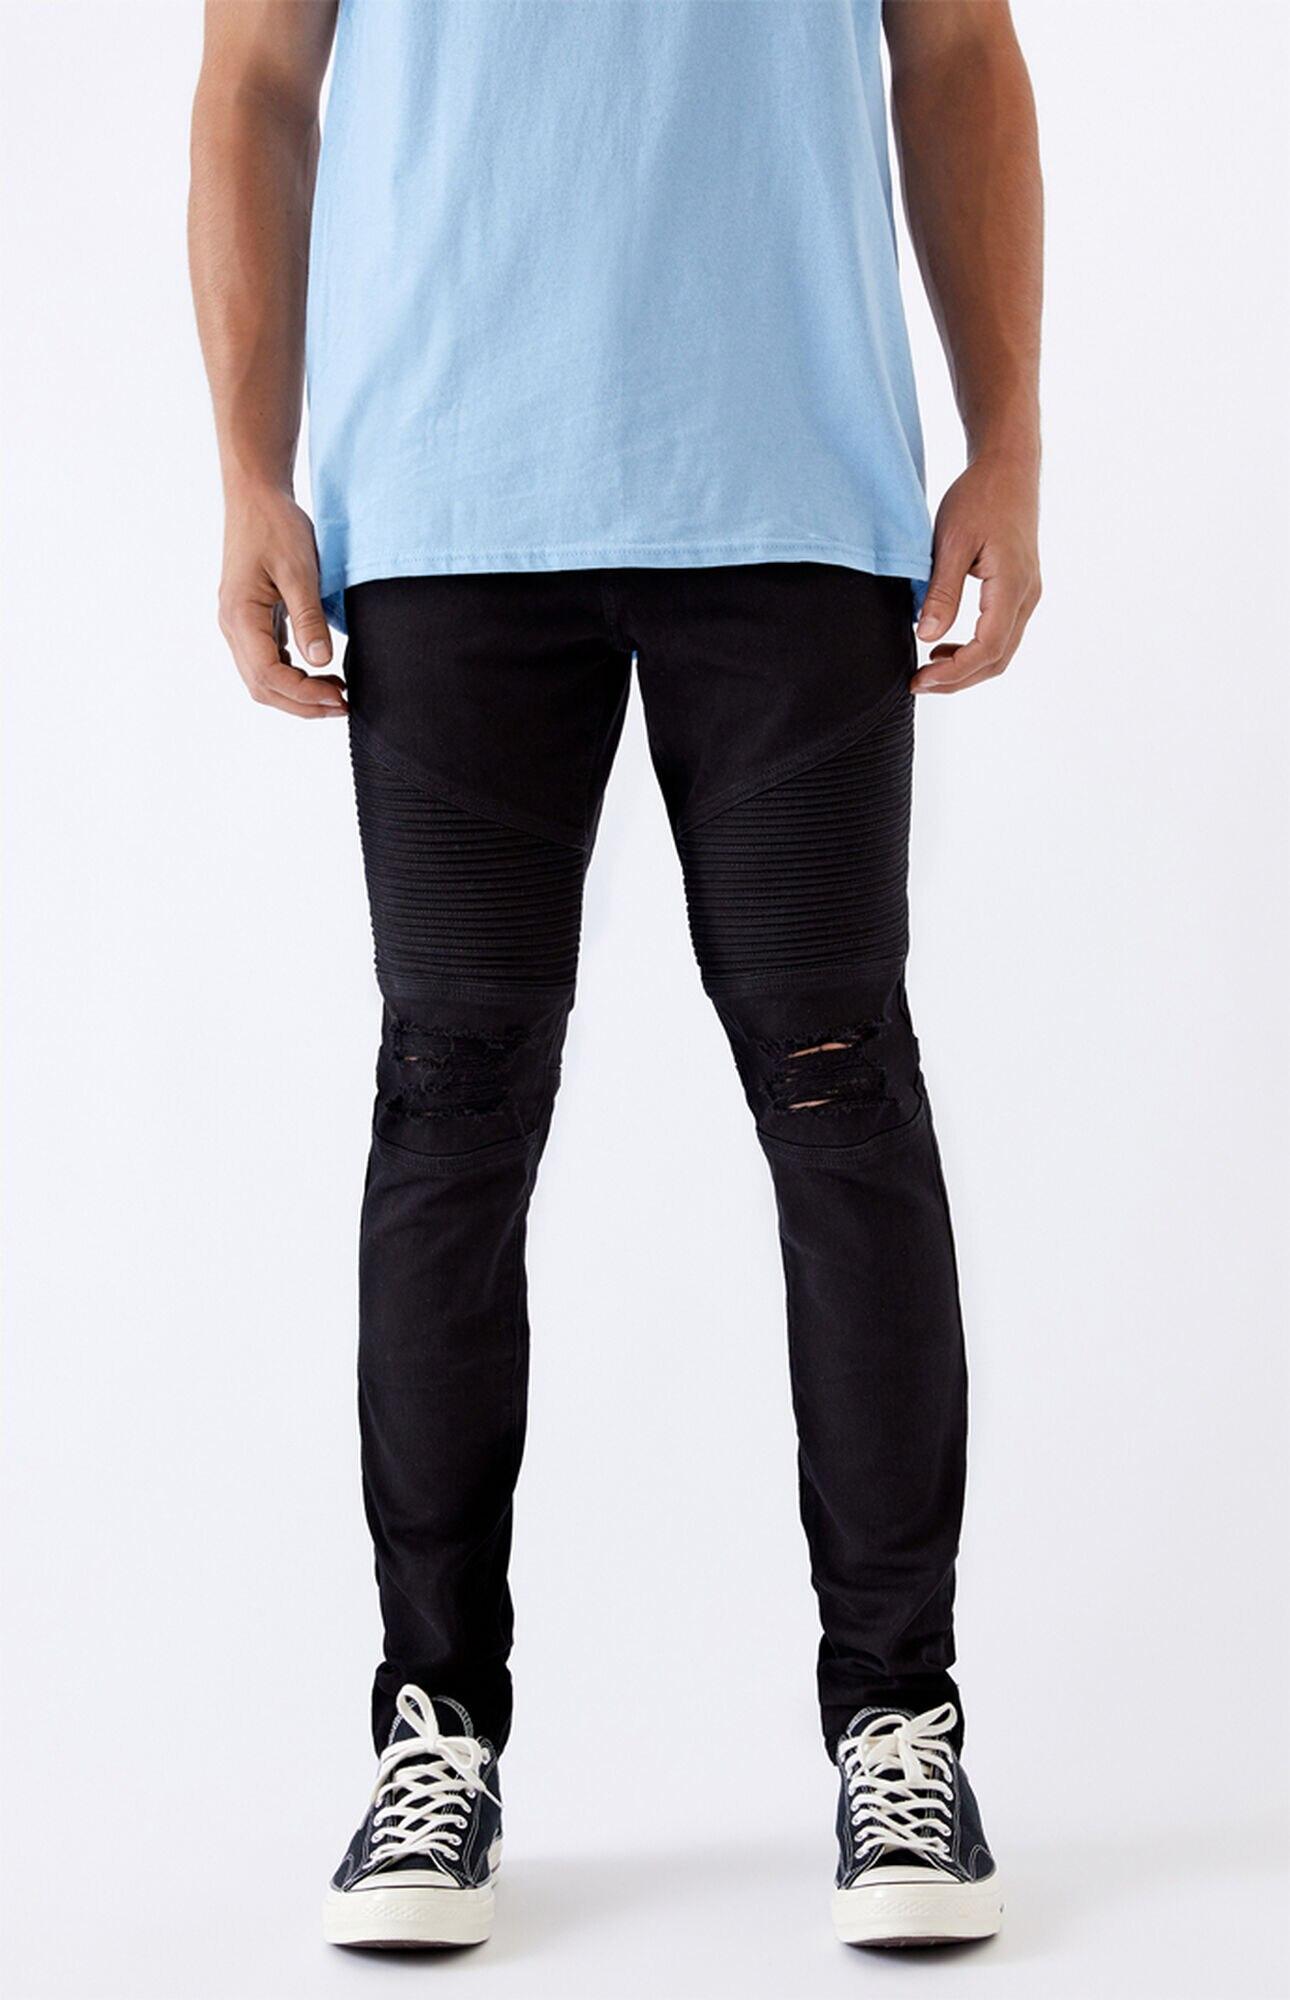 PacSun Denim black ripped biker stacked skinny jeans from Lyst